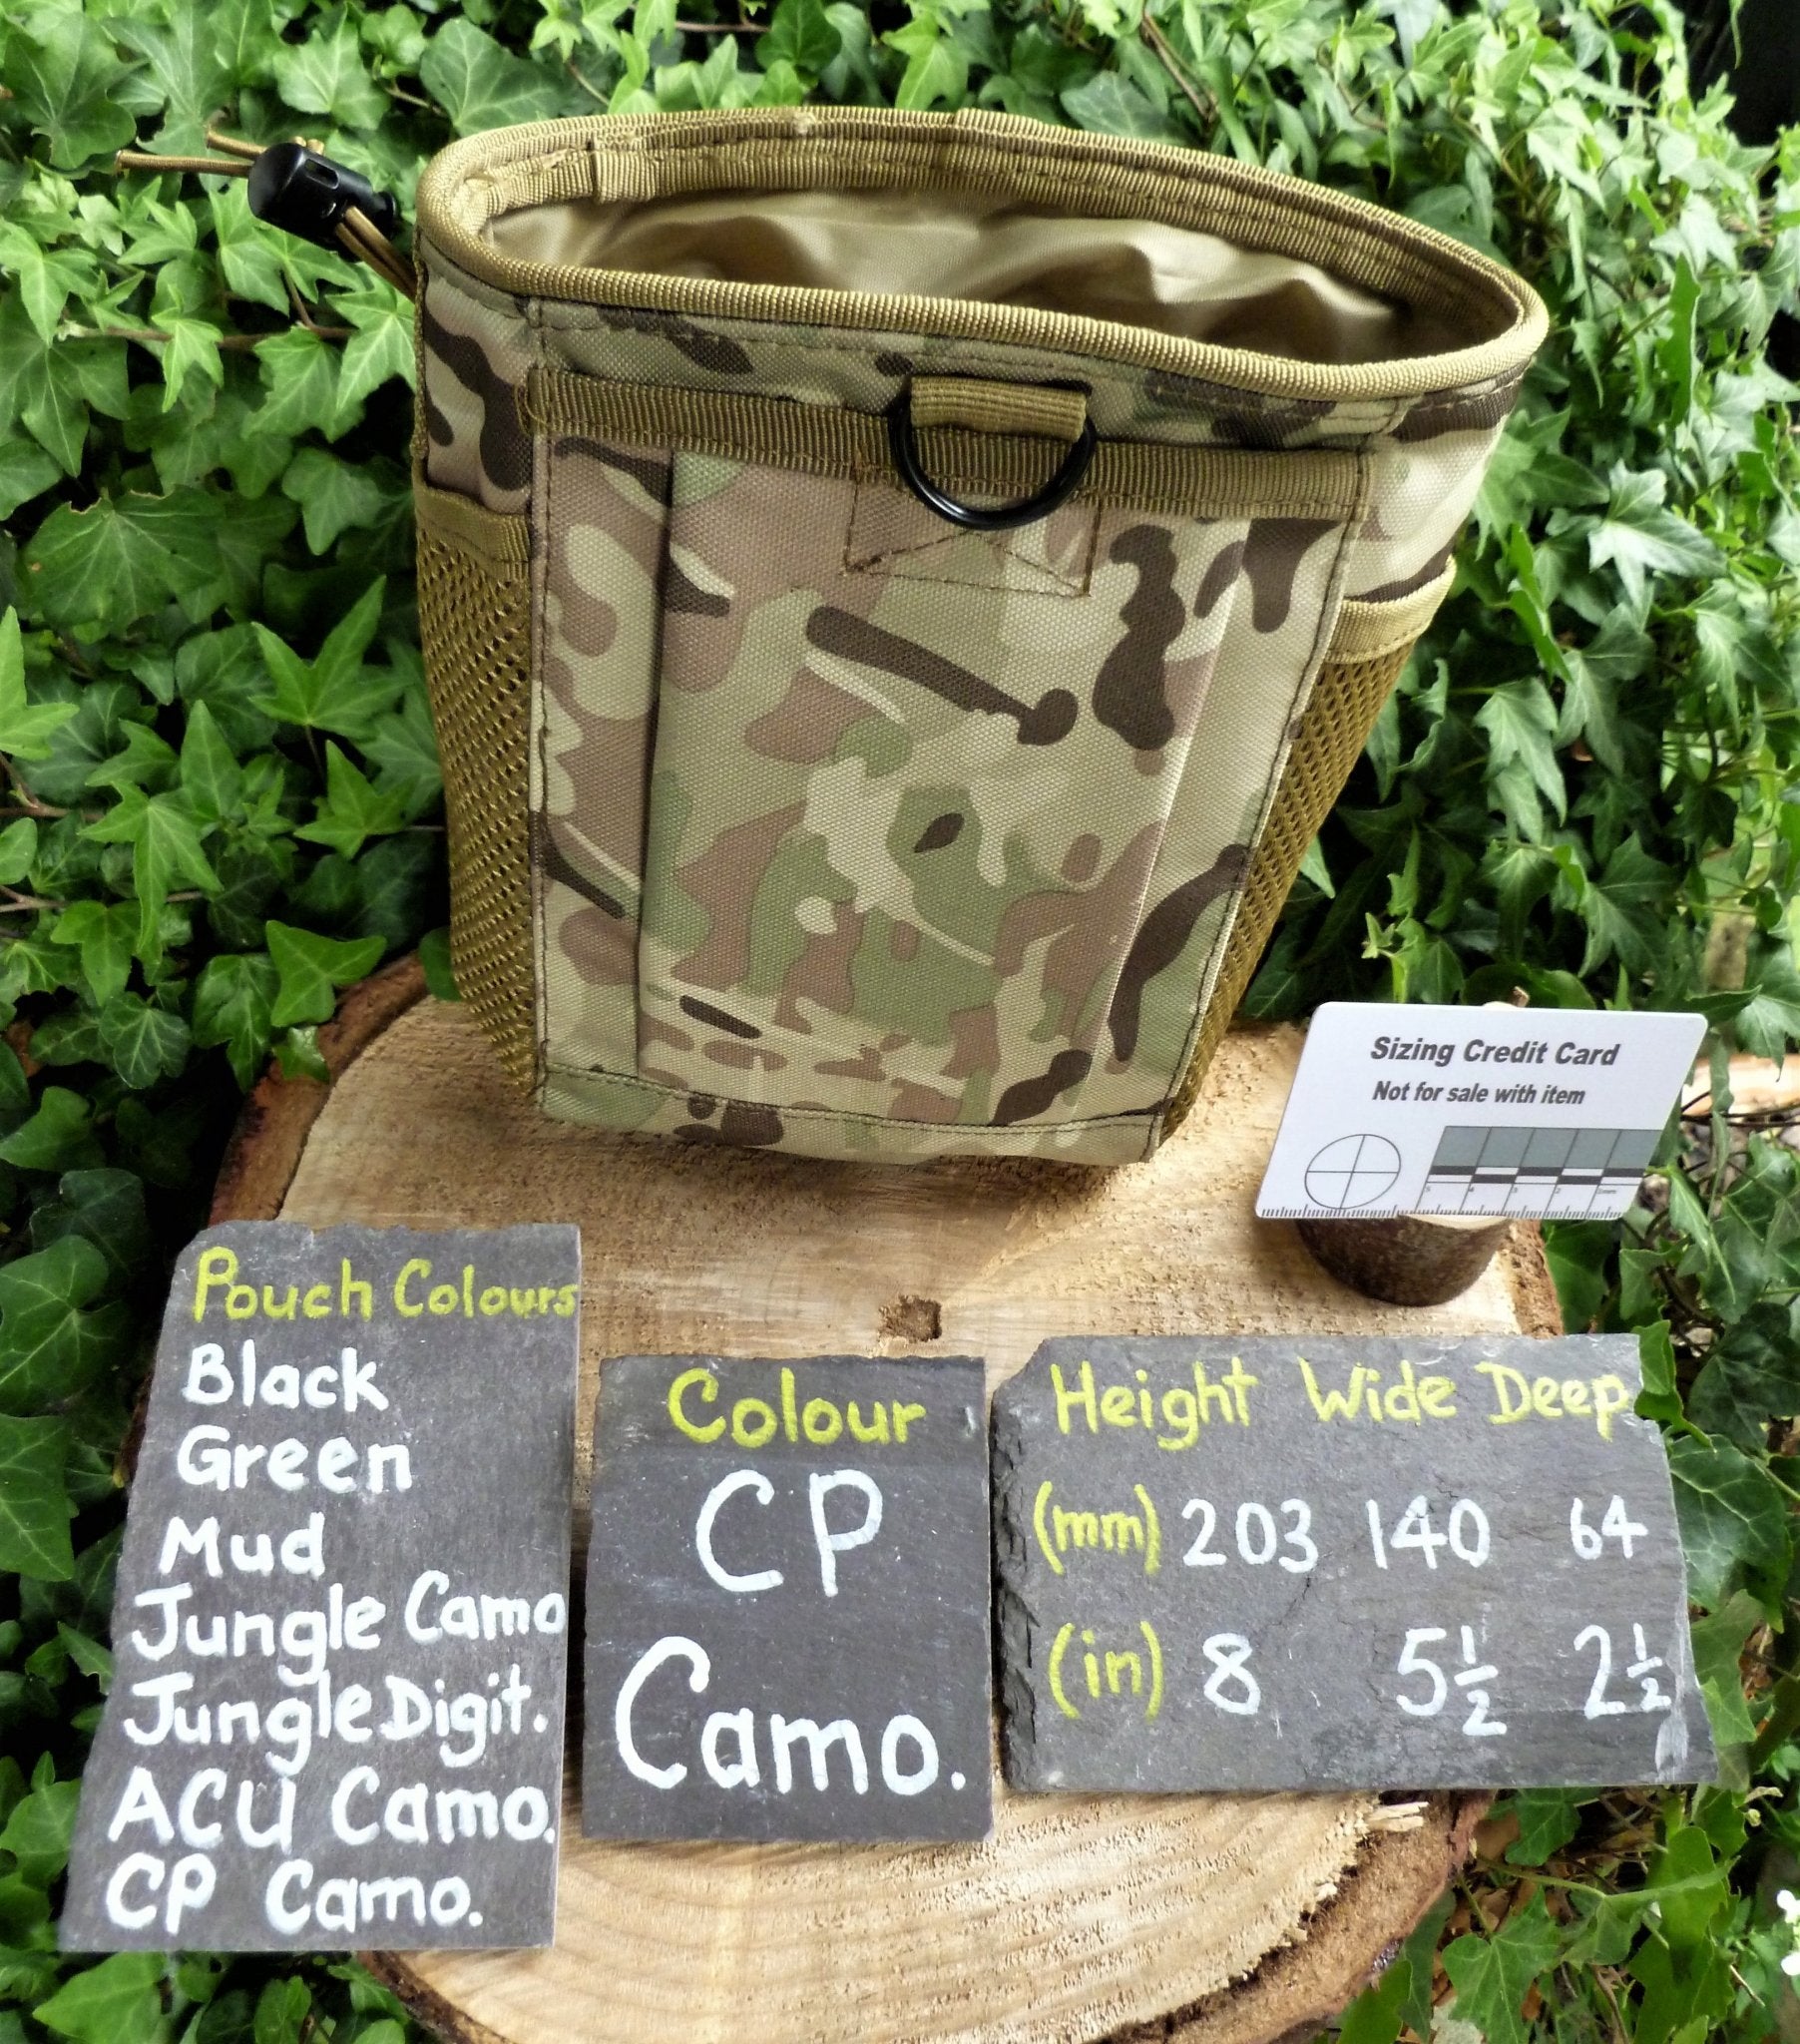 Foraging Pouches, Metal detecting or Paintball Foraging Pouch Huggins Attic CP Camo   [Huggins attic]